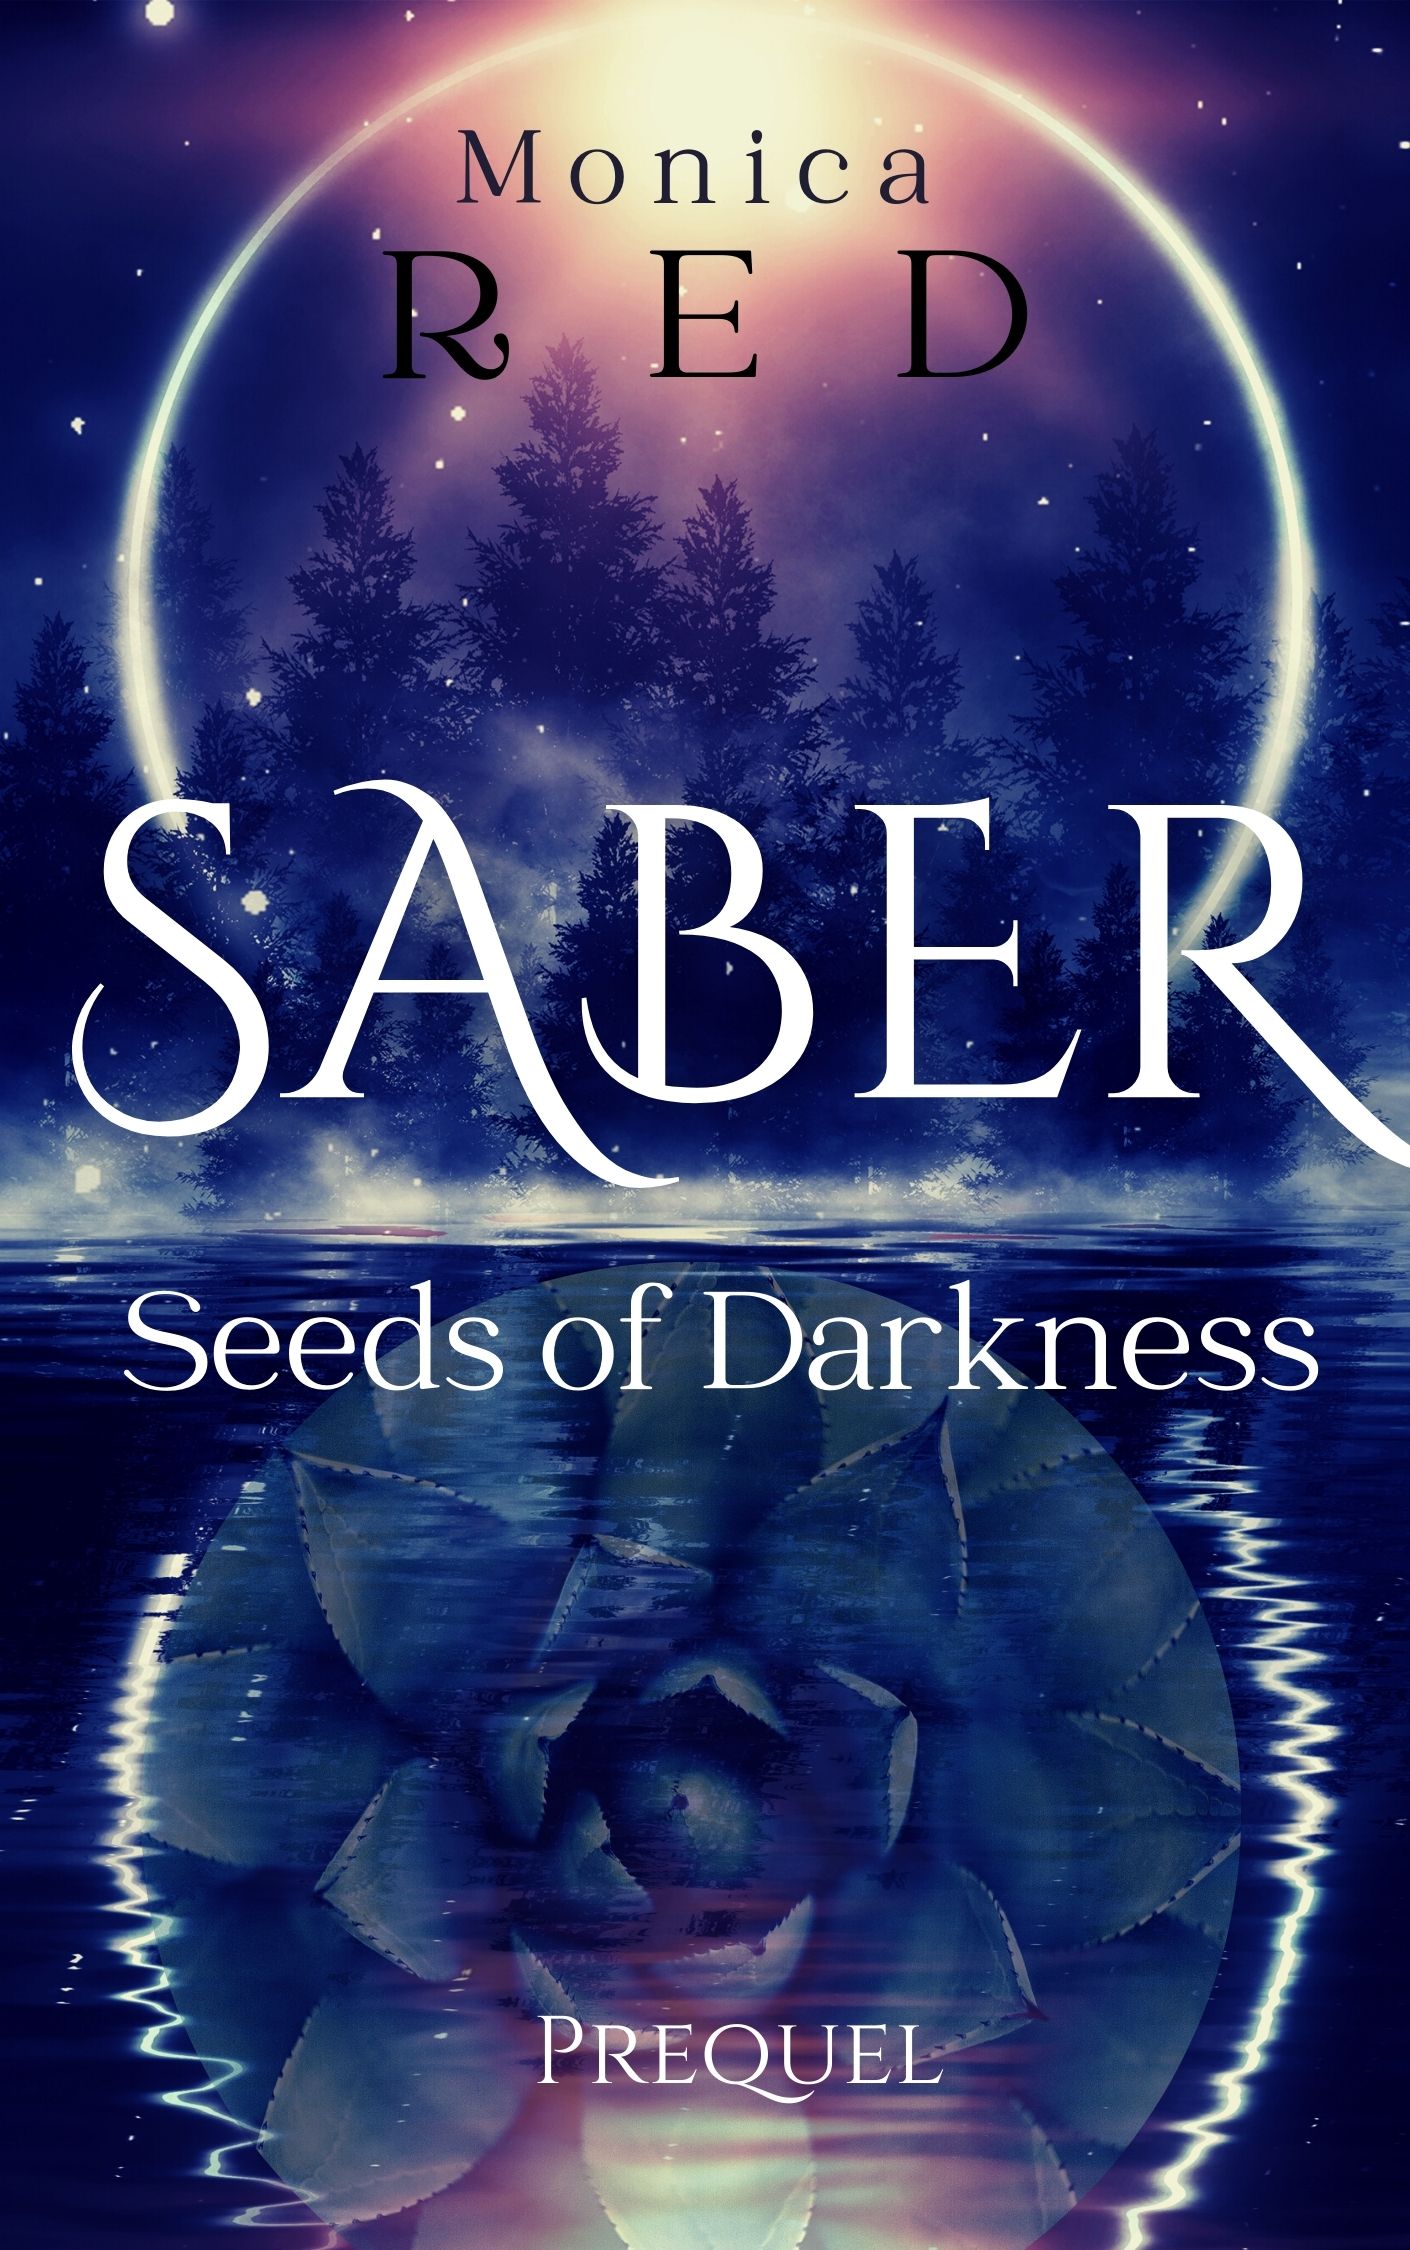 Prequel from Monica Red Author Saber trilogy